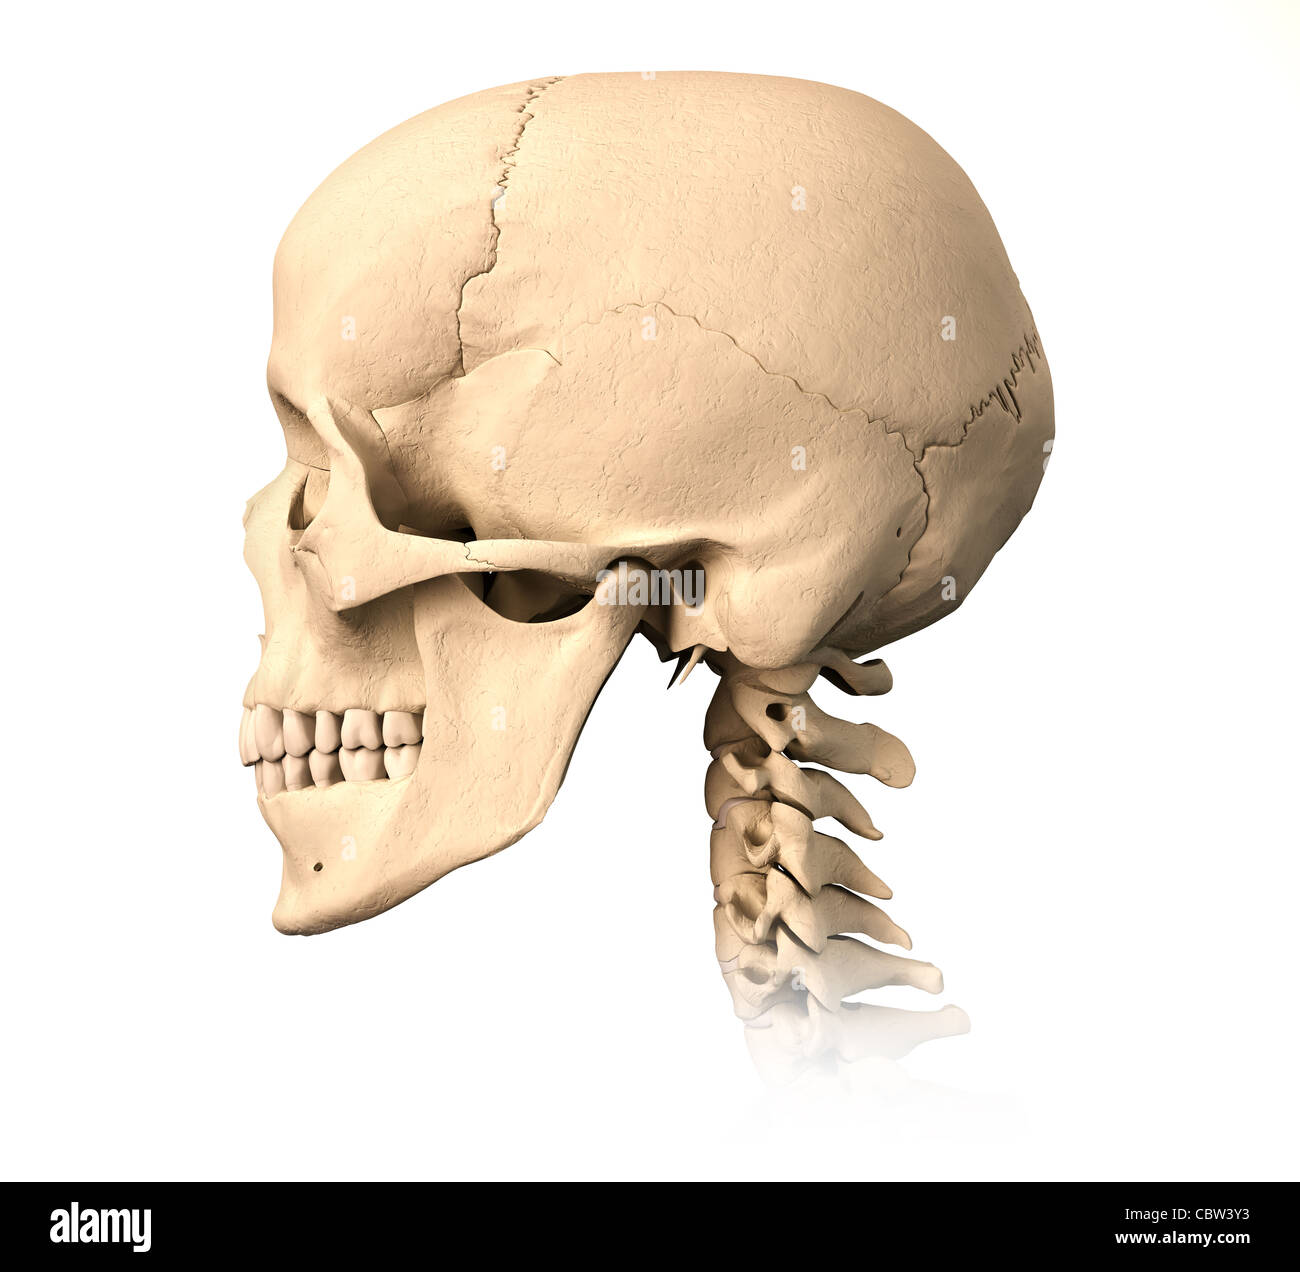 Very detailed and scientifically correct human skull. side view, on